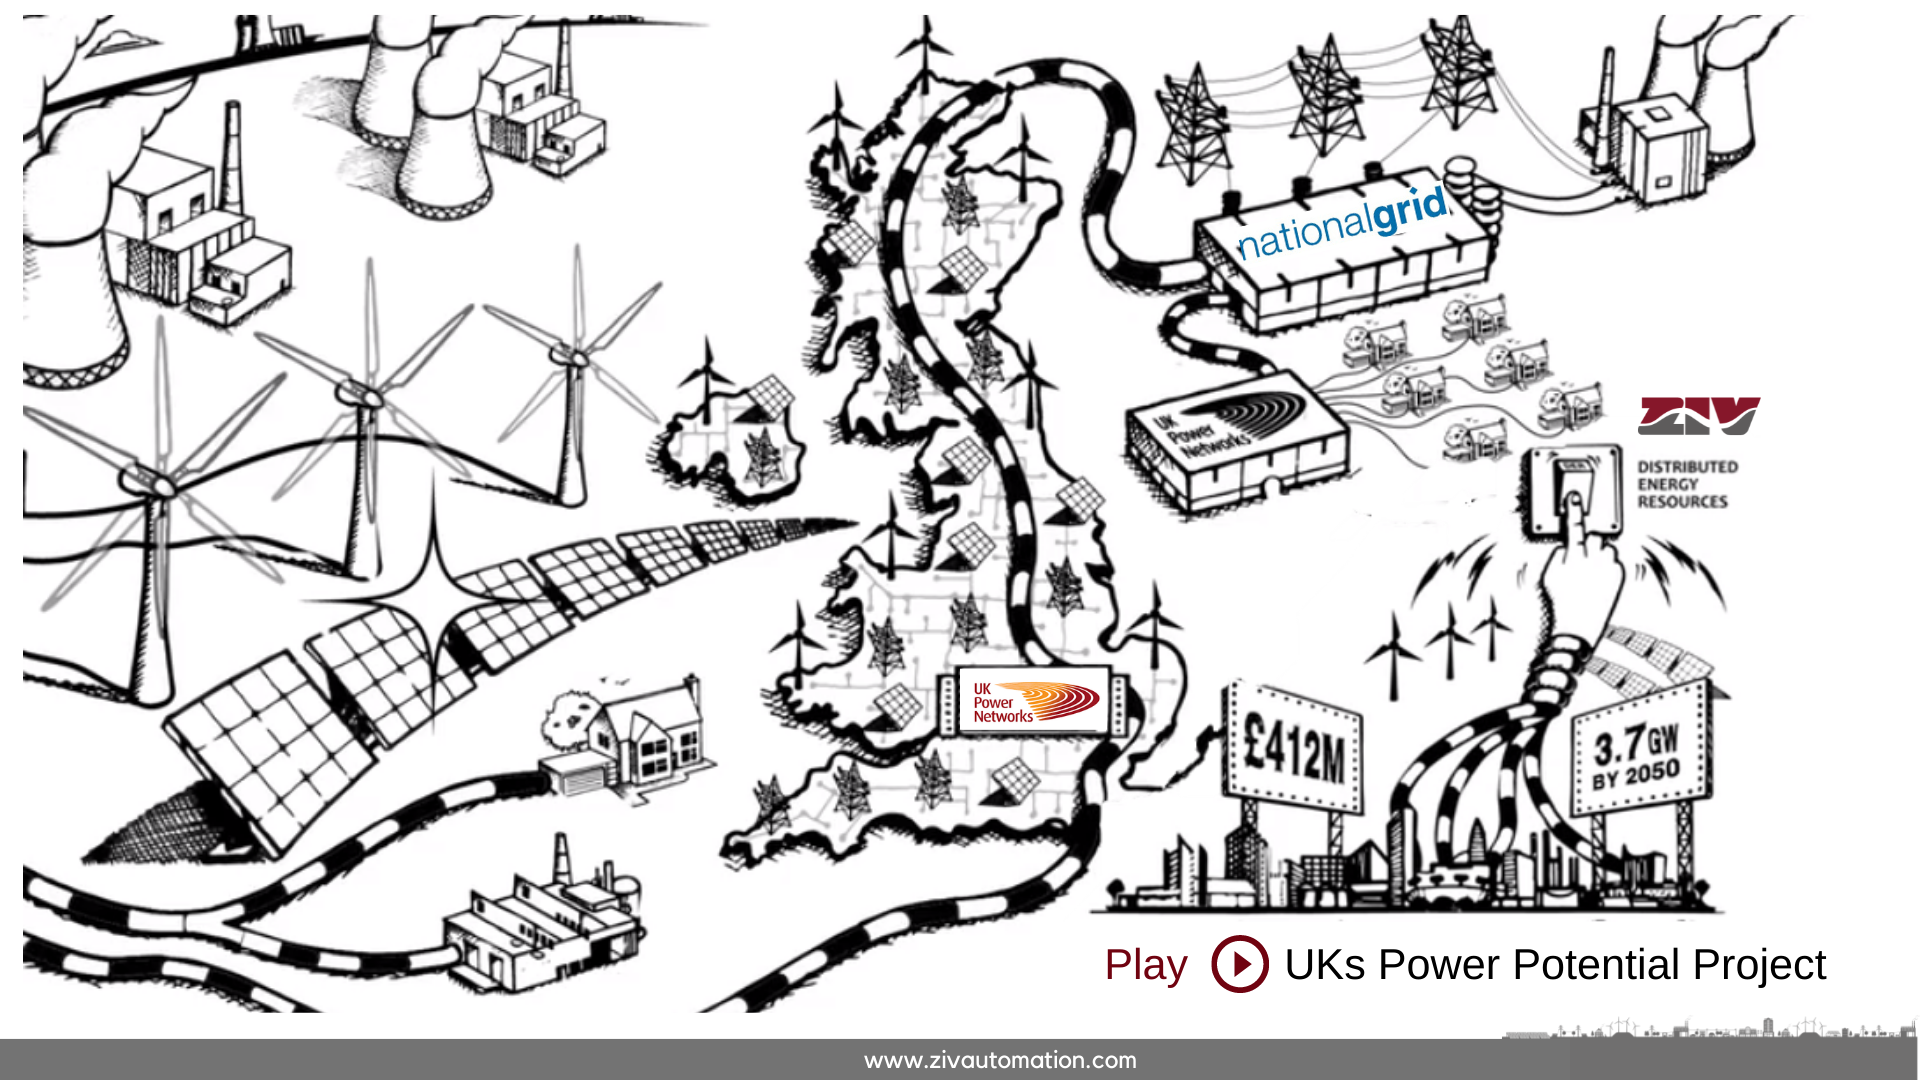 UKs Power Potential Project based on ZIV technology